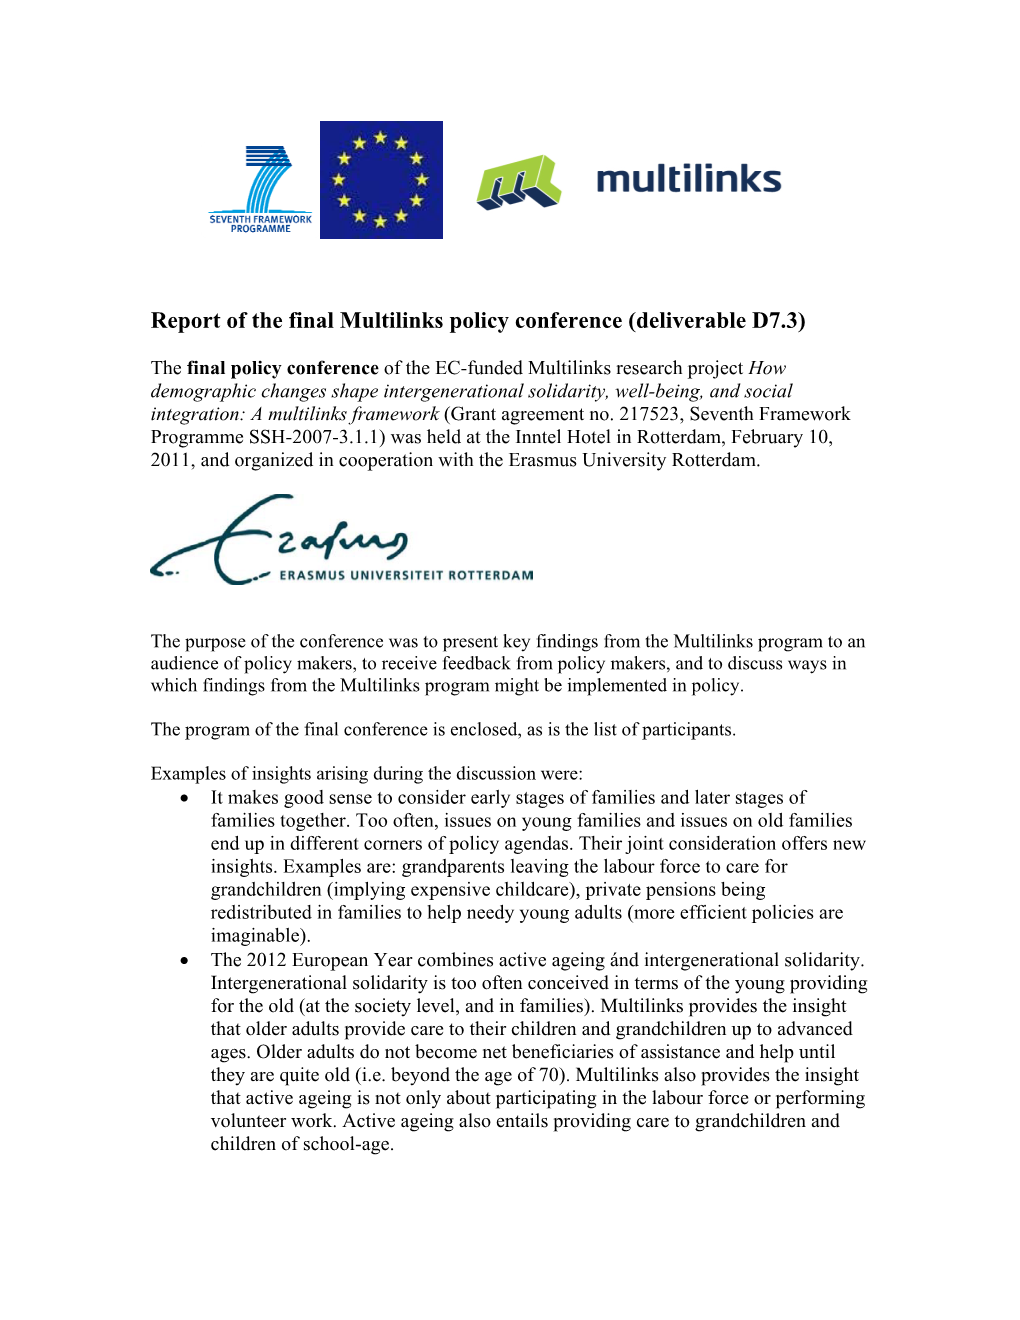 Report of the Final Multilinks Policy Conference (Deliverable D7.3)